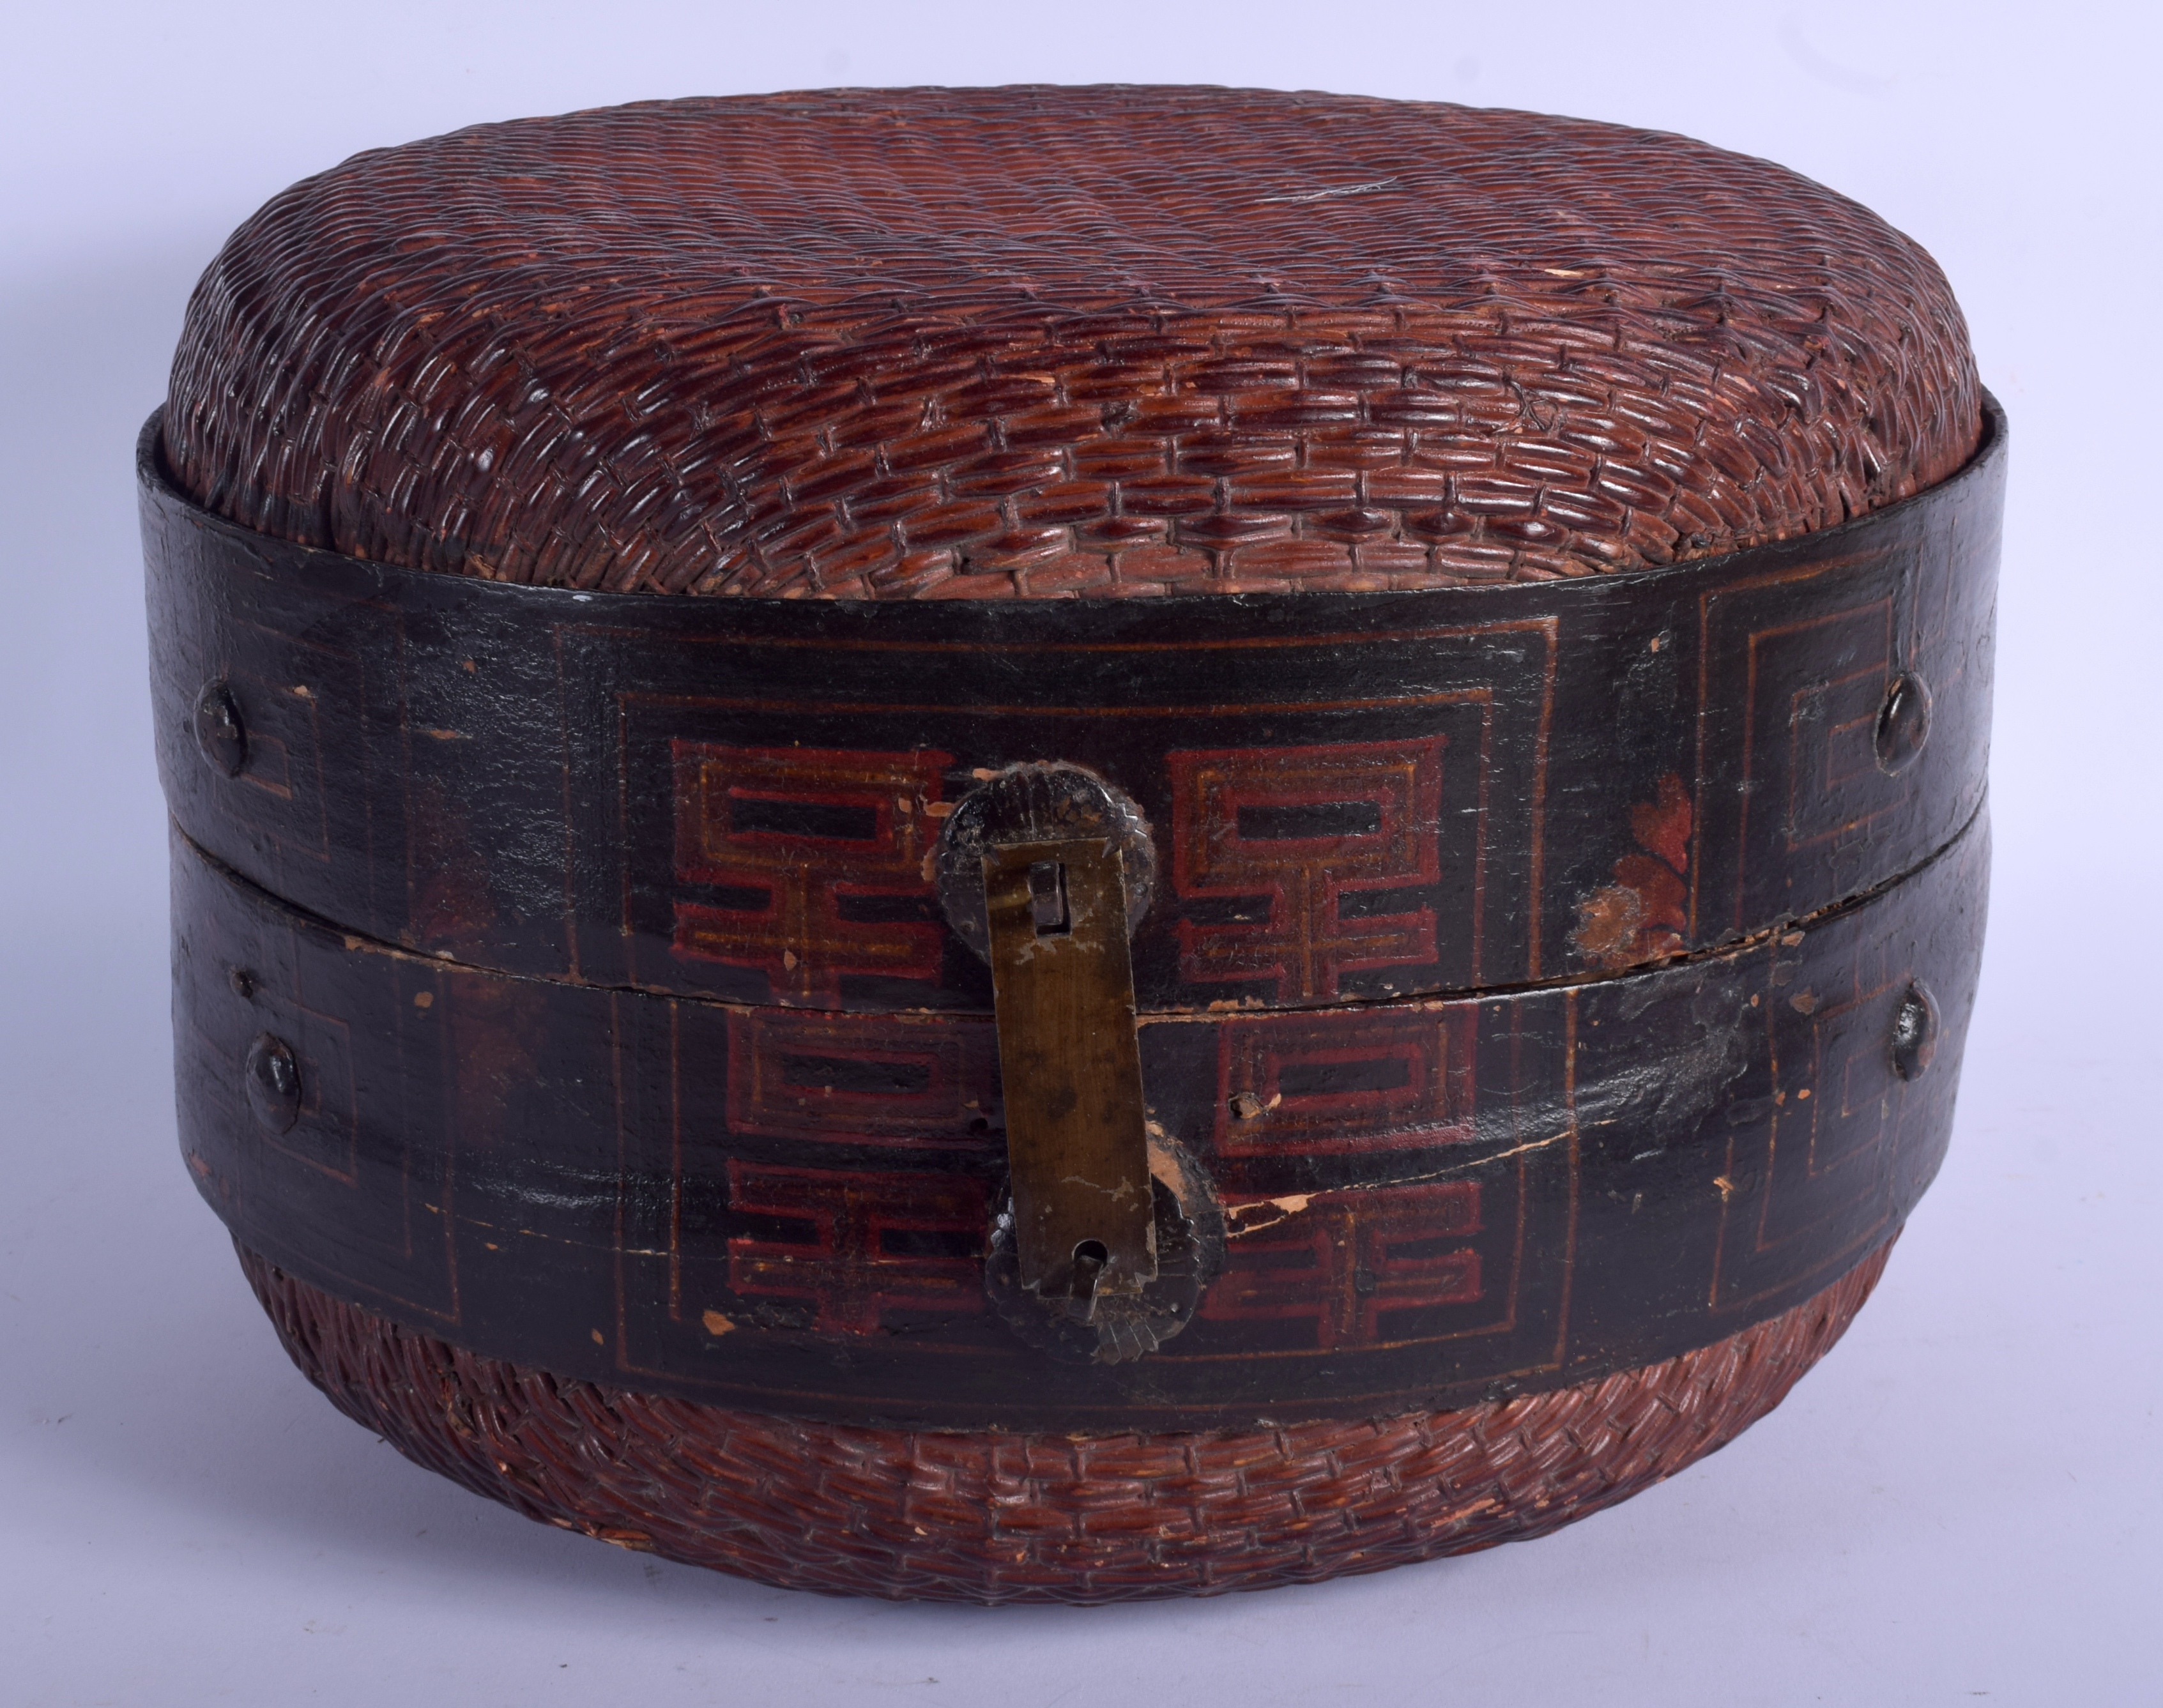 A 19TH CENTURY TIBETAN WOODEN BOX with iron fittings. 30 cm x 24 cm. - Image 2 of 3